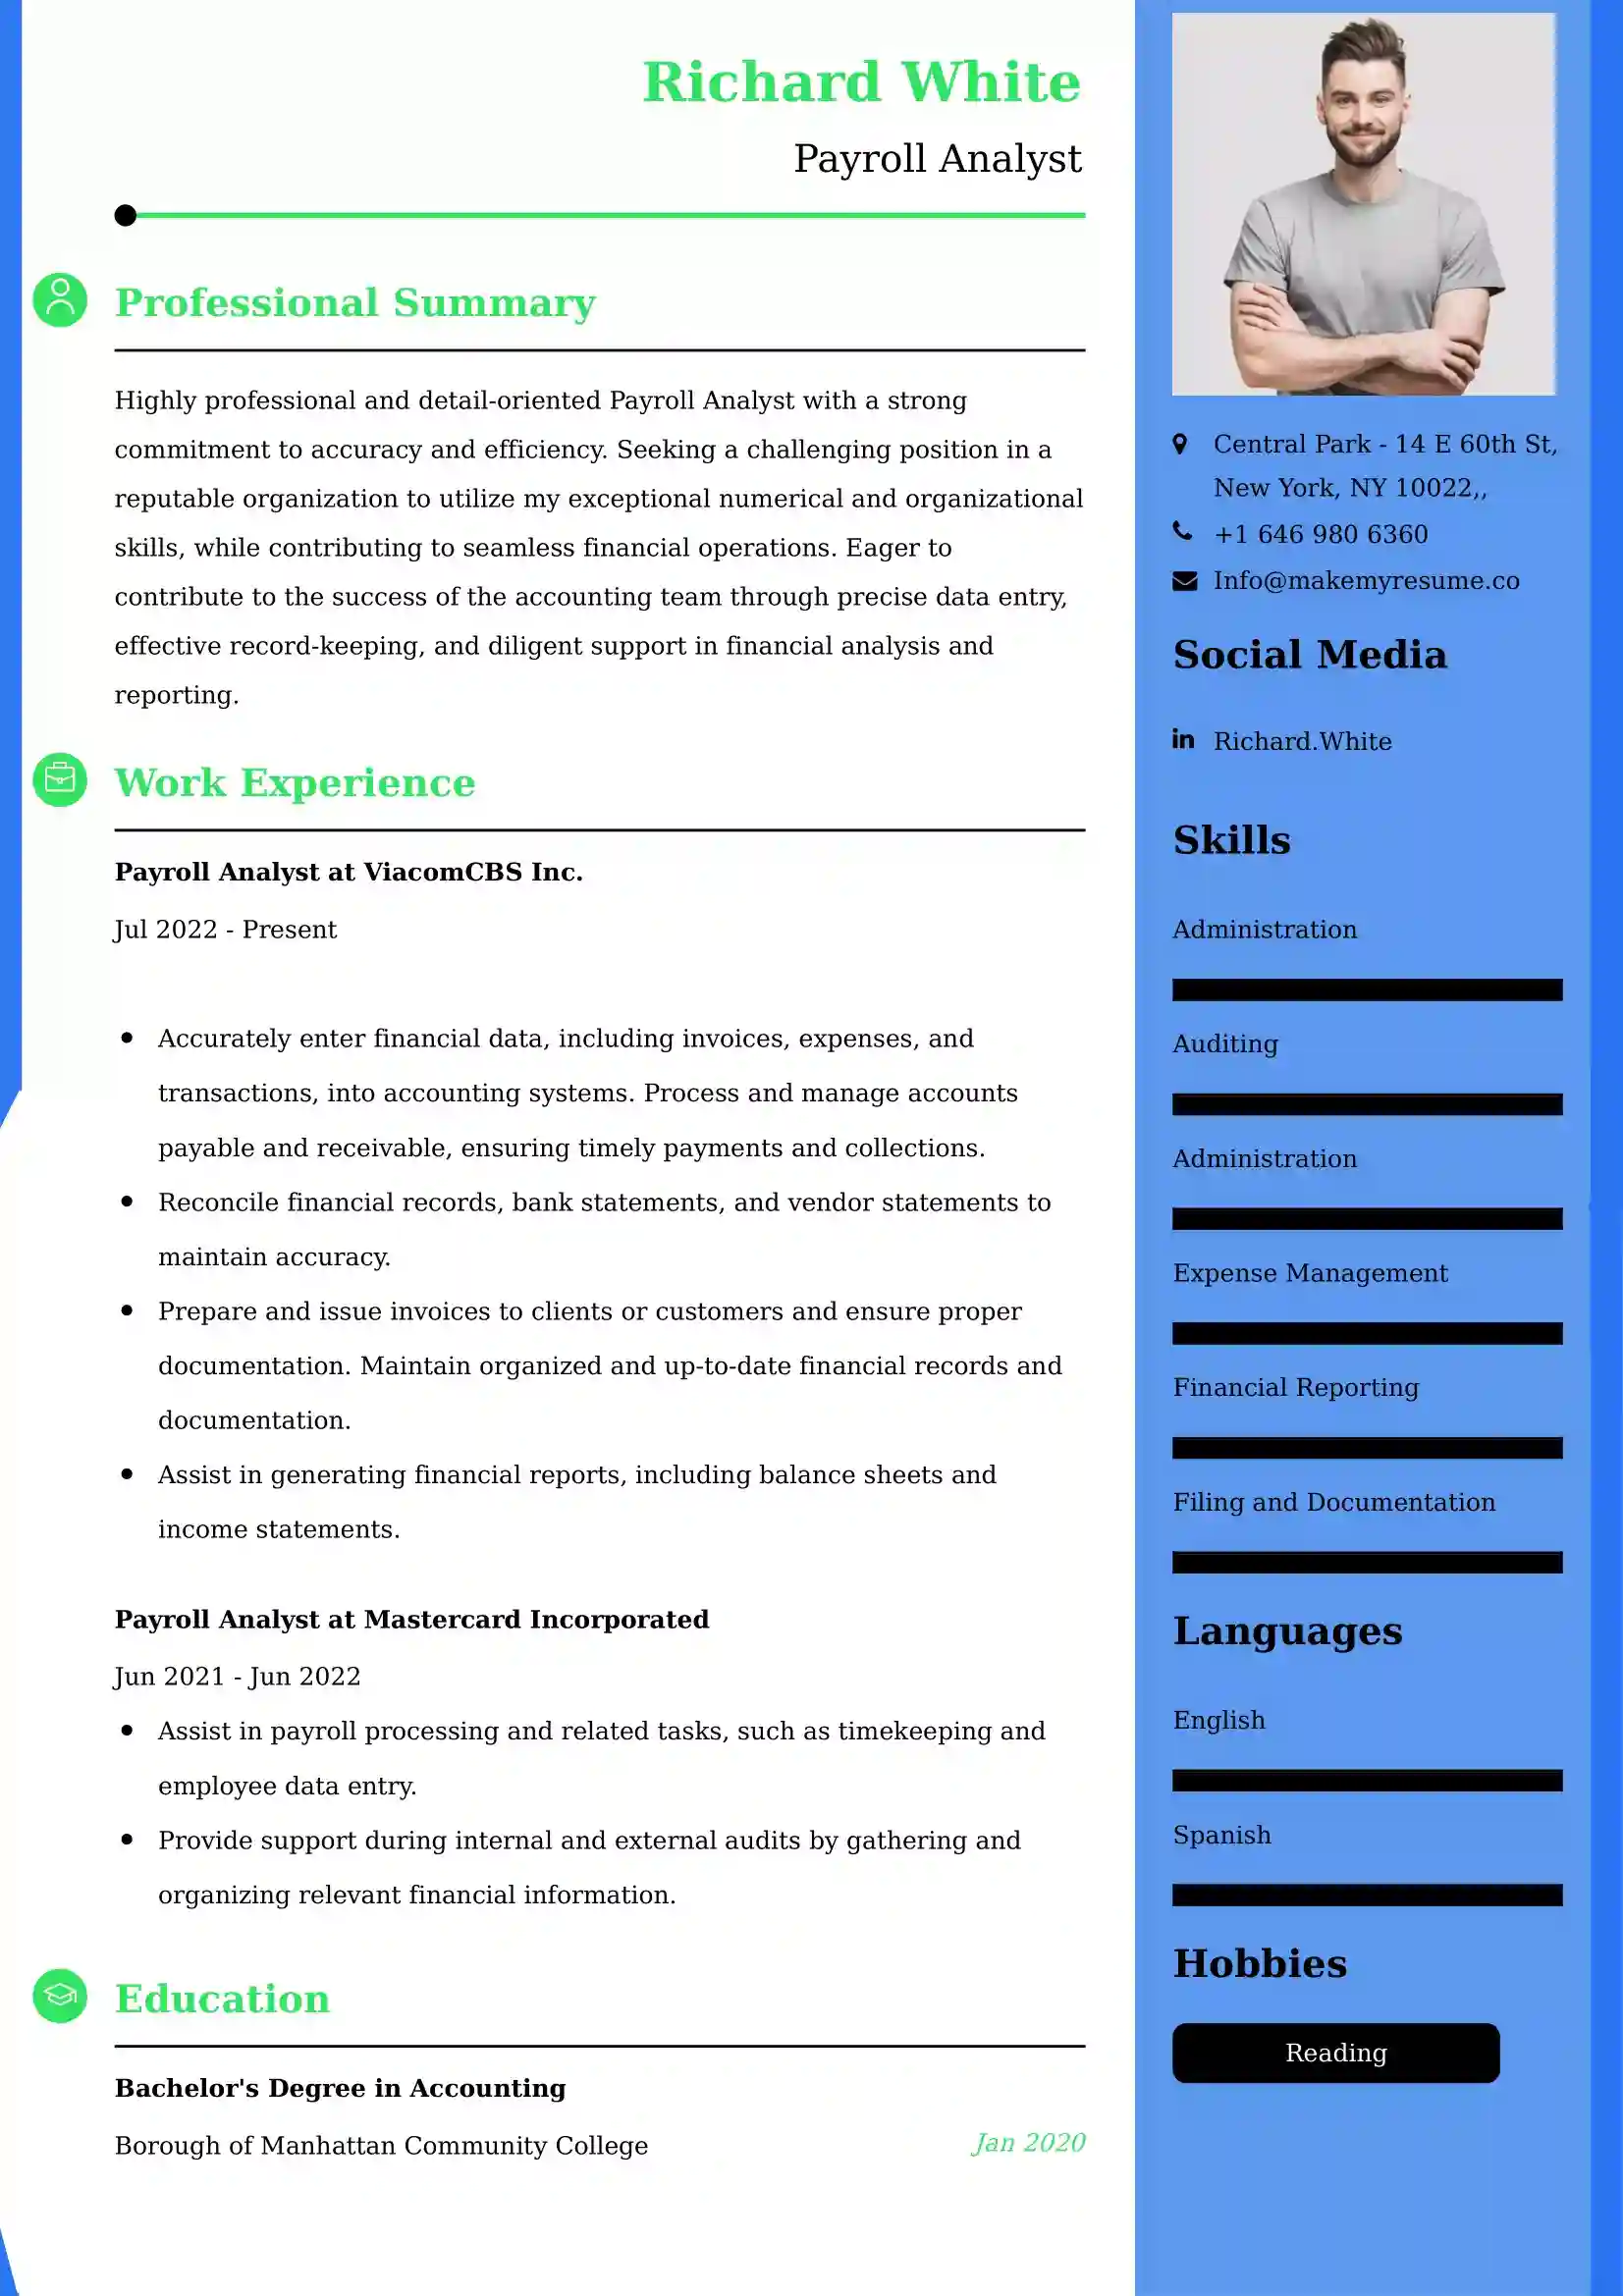 Payroll Analyst Resume Examples - Brazilian Format, Latest Template